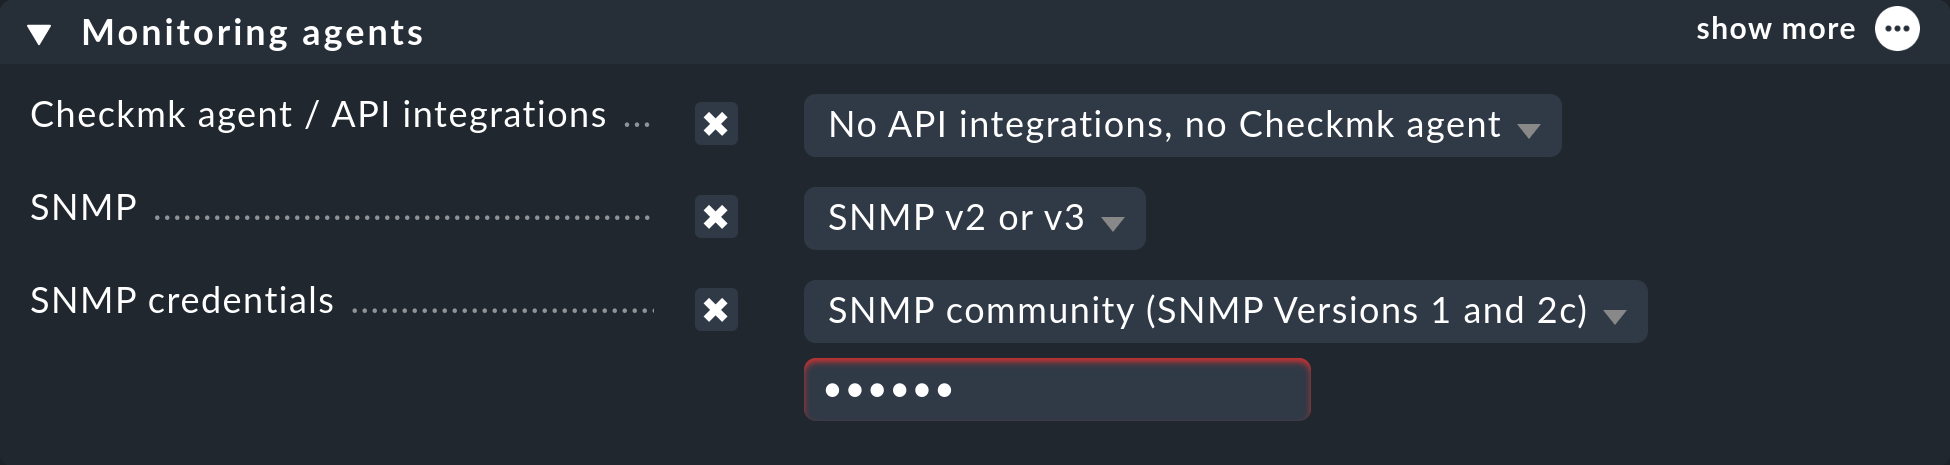 Adding a host to monitoring via SNMP.